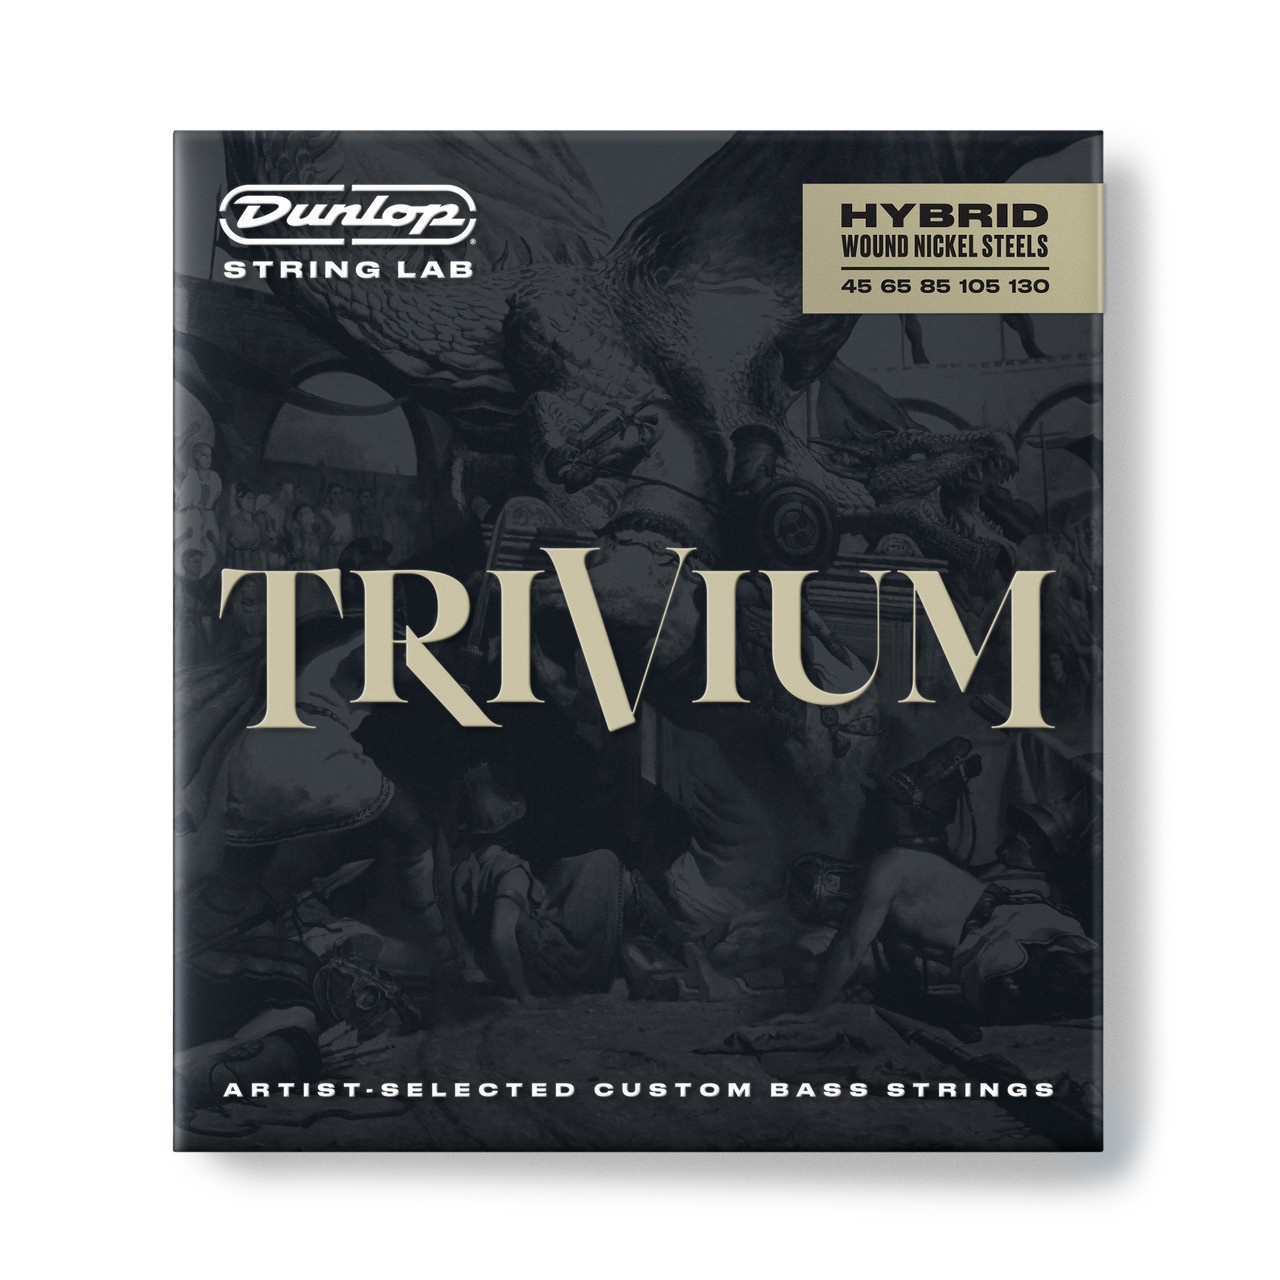 Dunlop Trivium Hybrid Wound Nickel Steel Bass Strings, 5-String Set (45-130), Paolo Gregoletto Artist-Selected